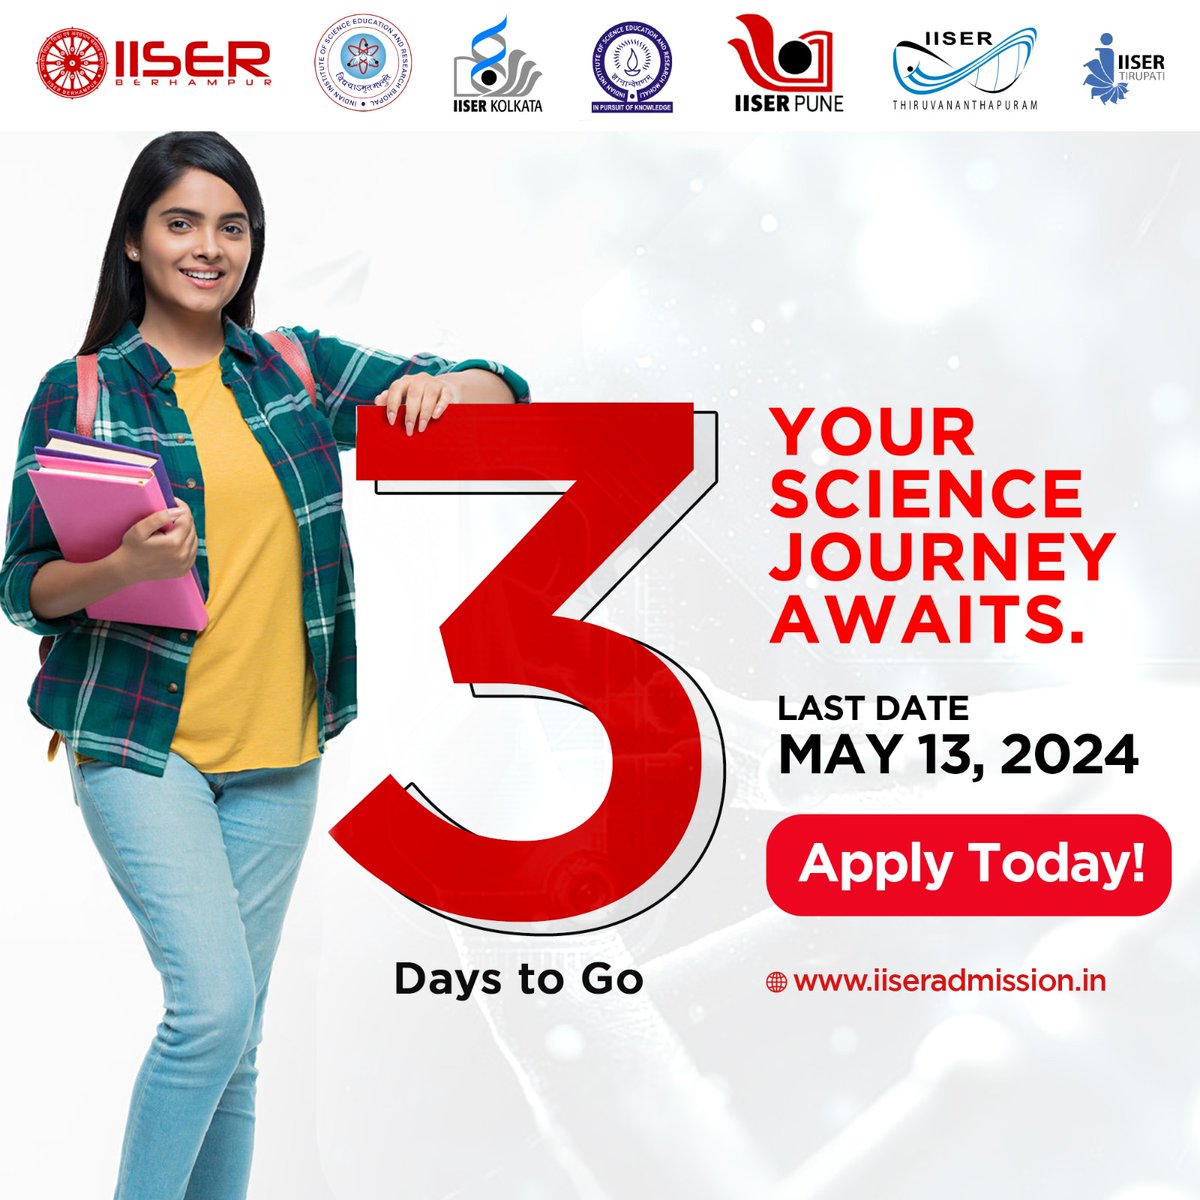 3 days left to make your mark! Apply now for the IISER Aptitude Test and unlock a world of scientific opportunity.  Seize this moment to chart your course towards academic excellence. Register by May 13th, 2024. For more details, visit iiseradmission.in